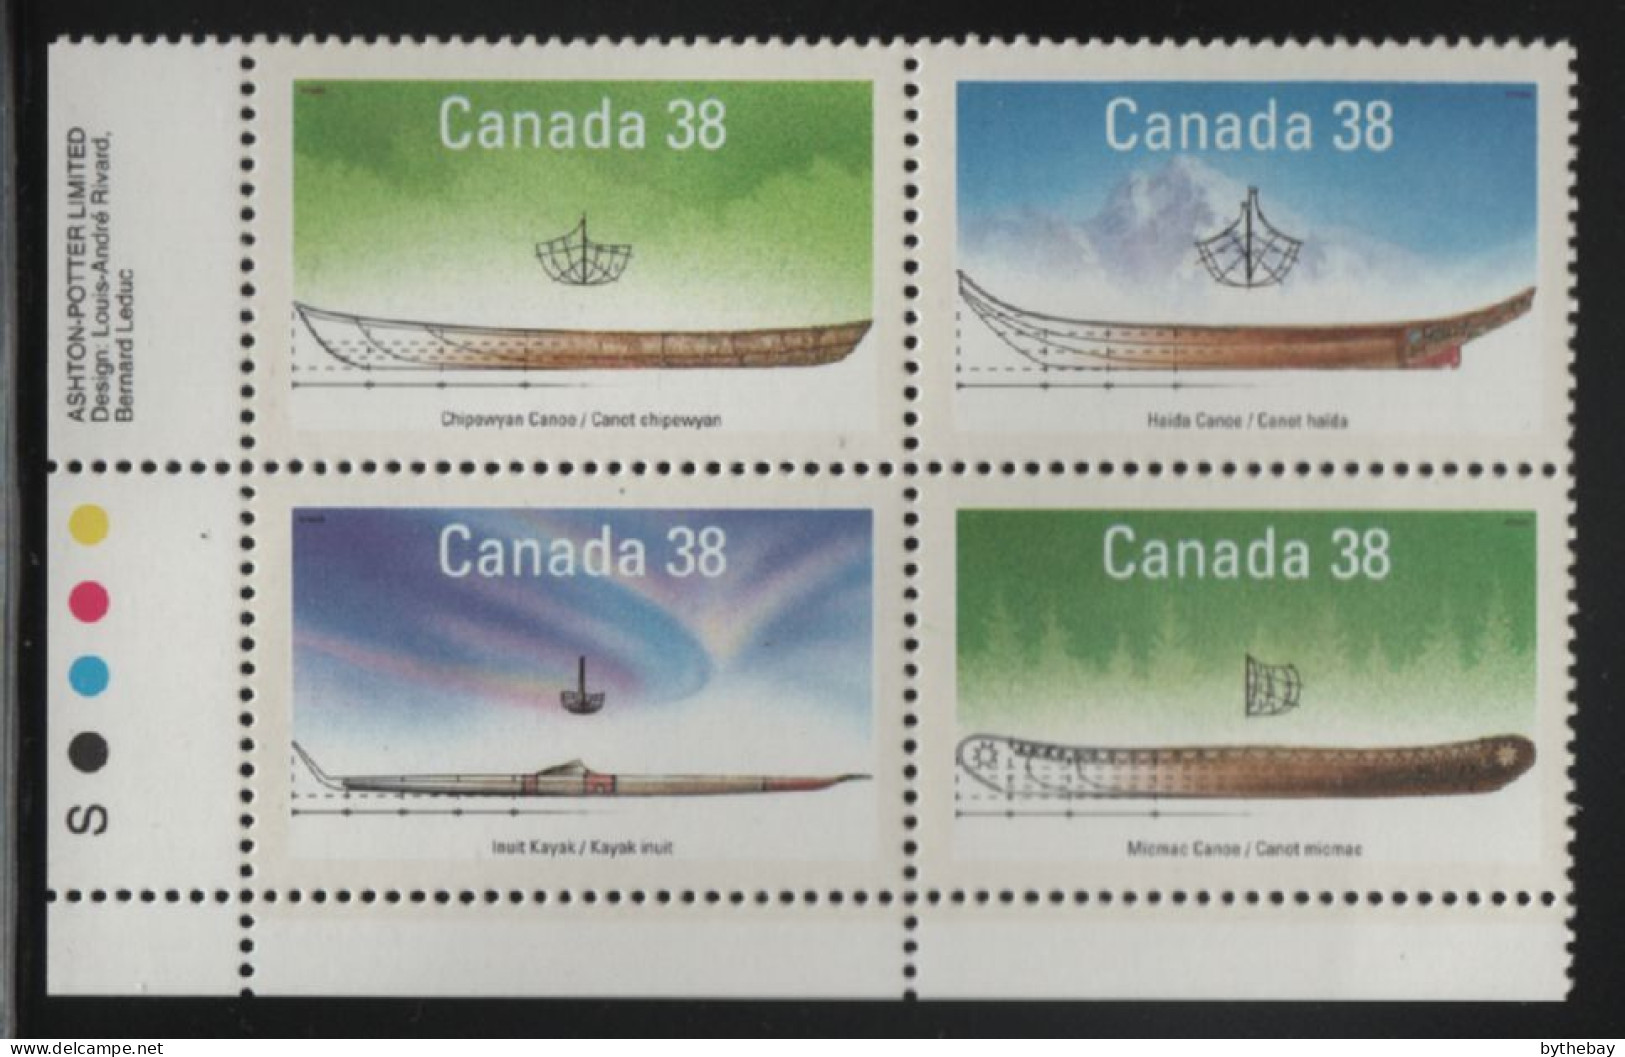 Canada 1989 MNH Sc 1232a 38c Native Boats LL Plate Block - Plate Number & Inscriptions